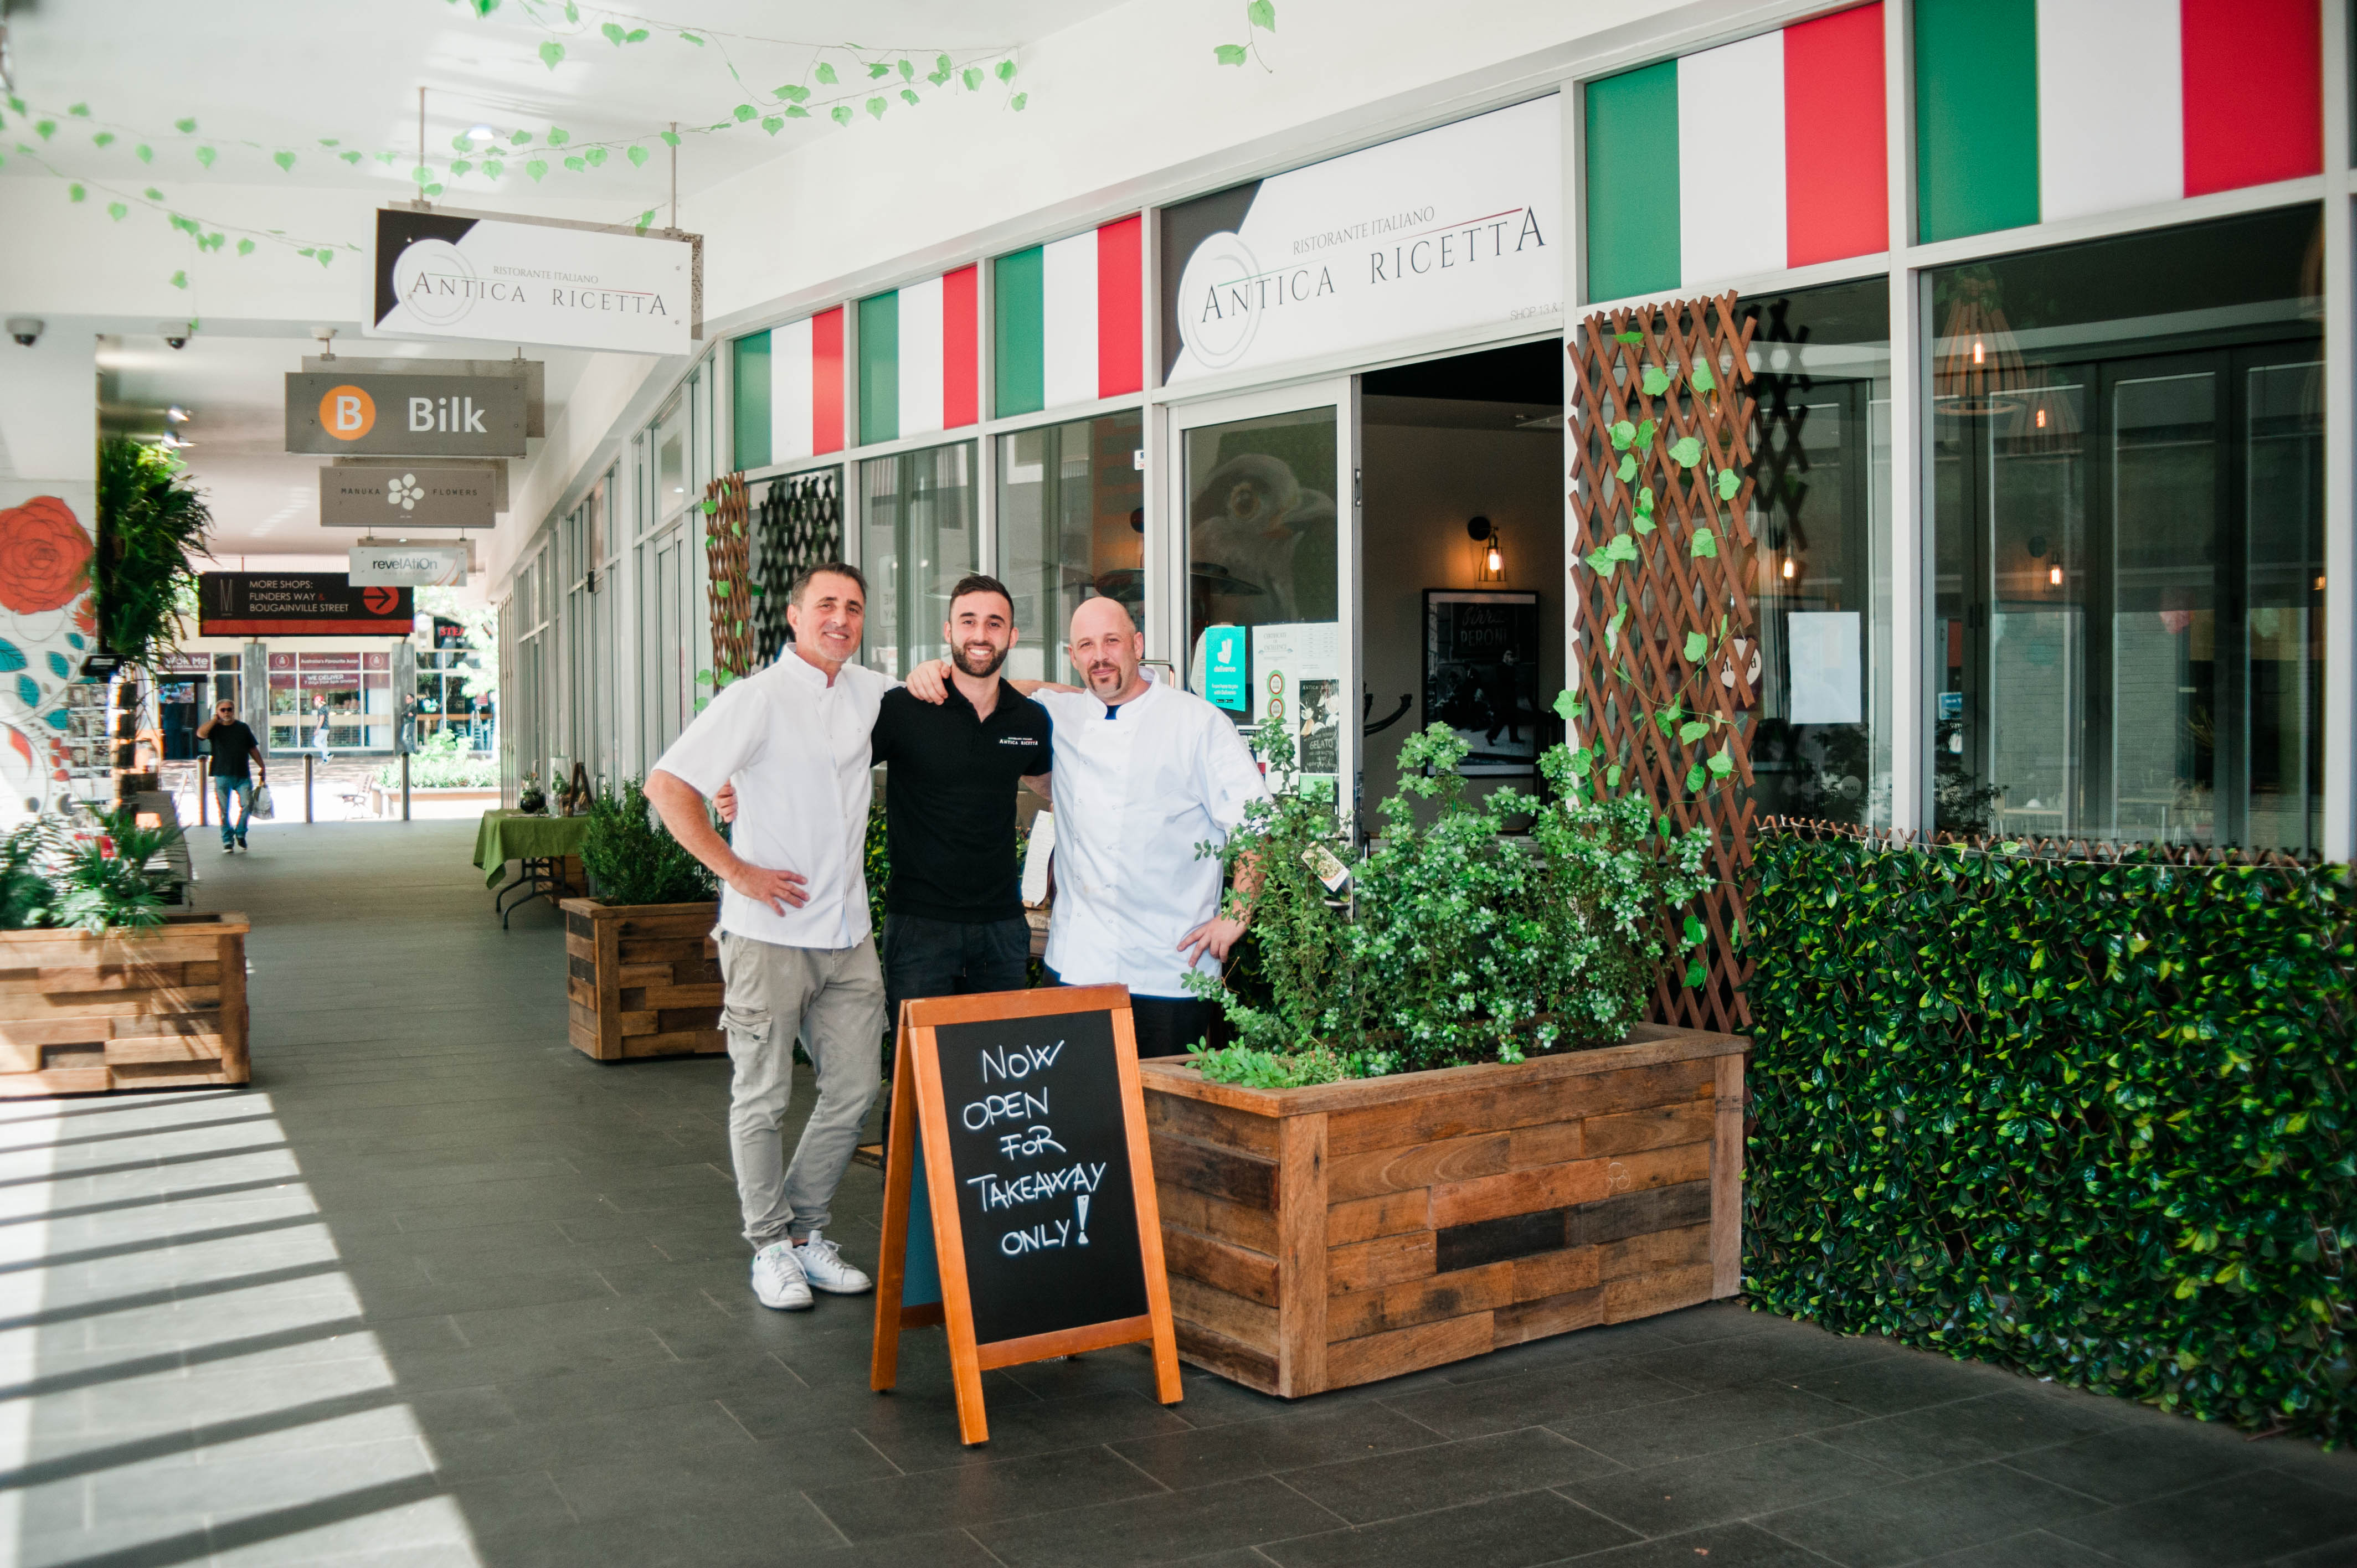 Antica Ricetta now delivering top quality Italian food (and wine!)